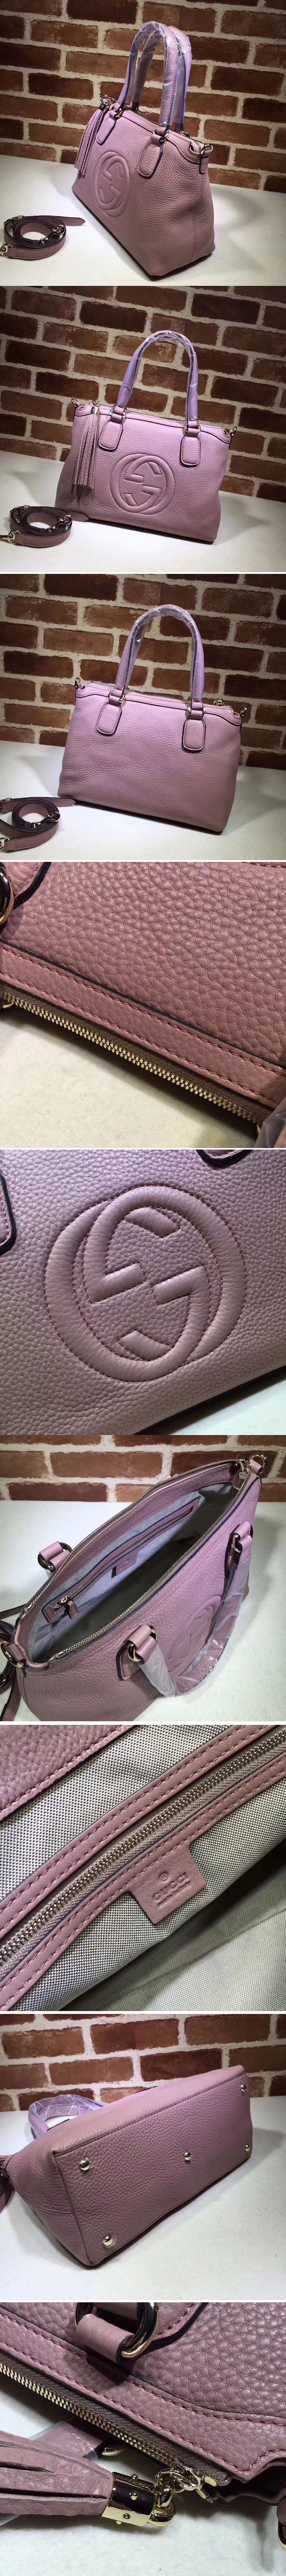 Replica Gucci 308362 Calf Leather Soho Top Handle Bags Pink